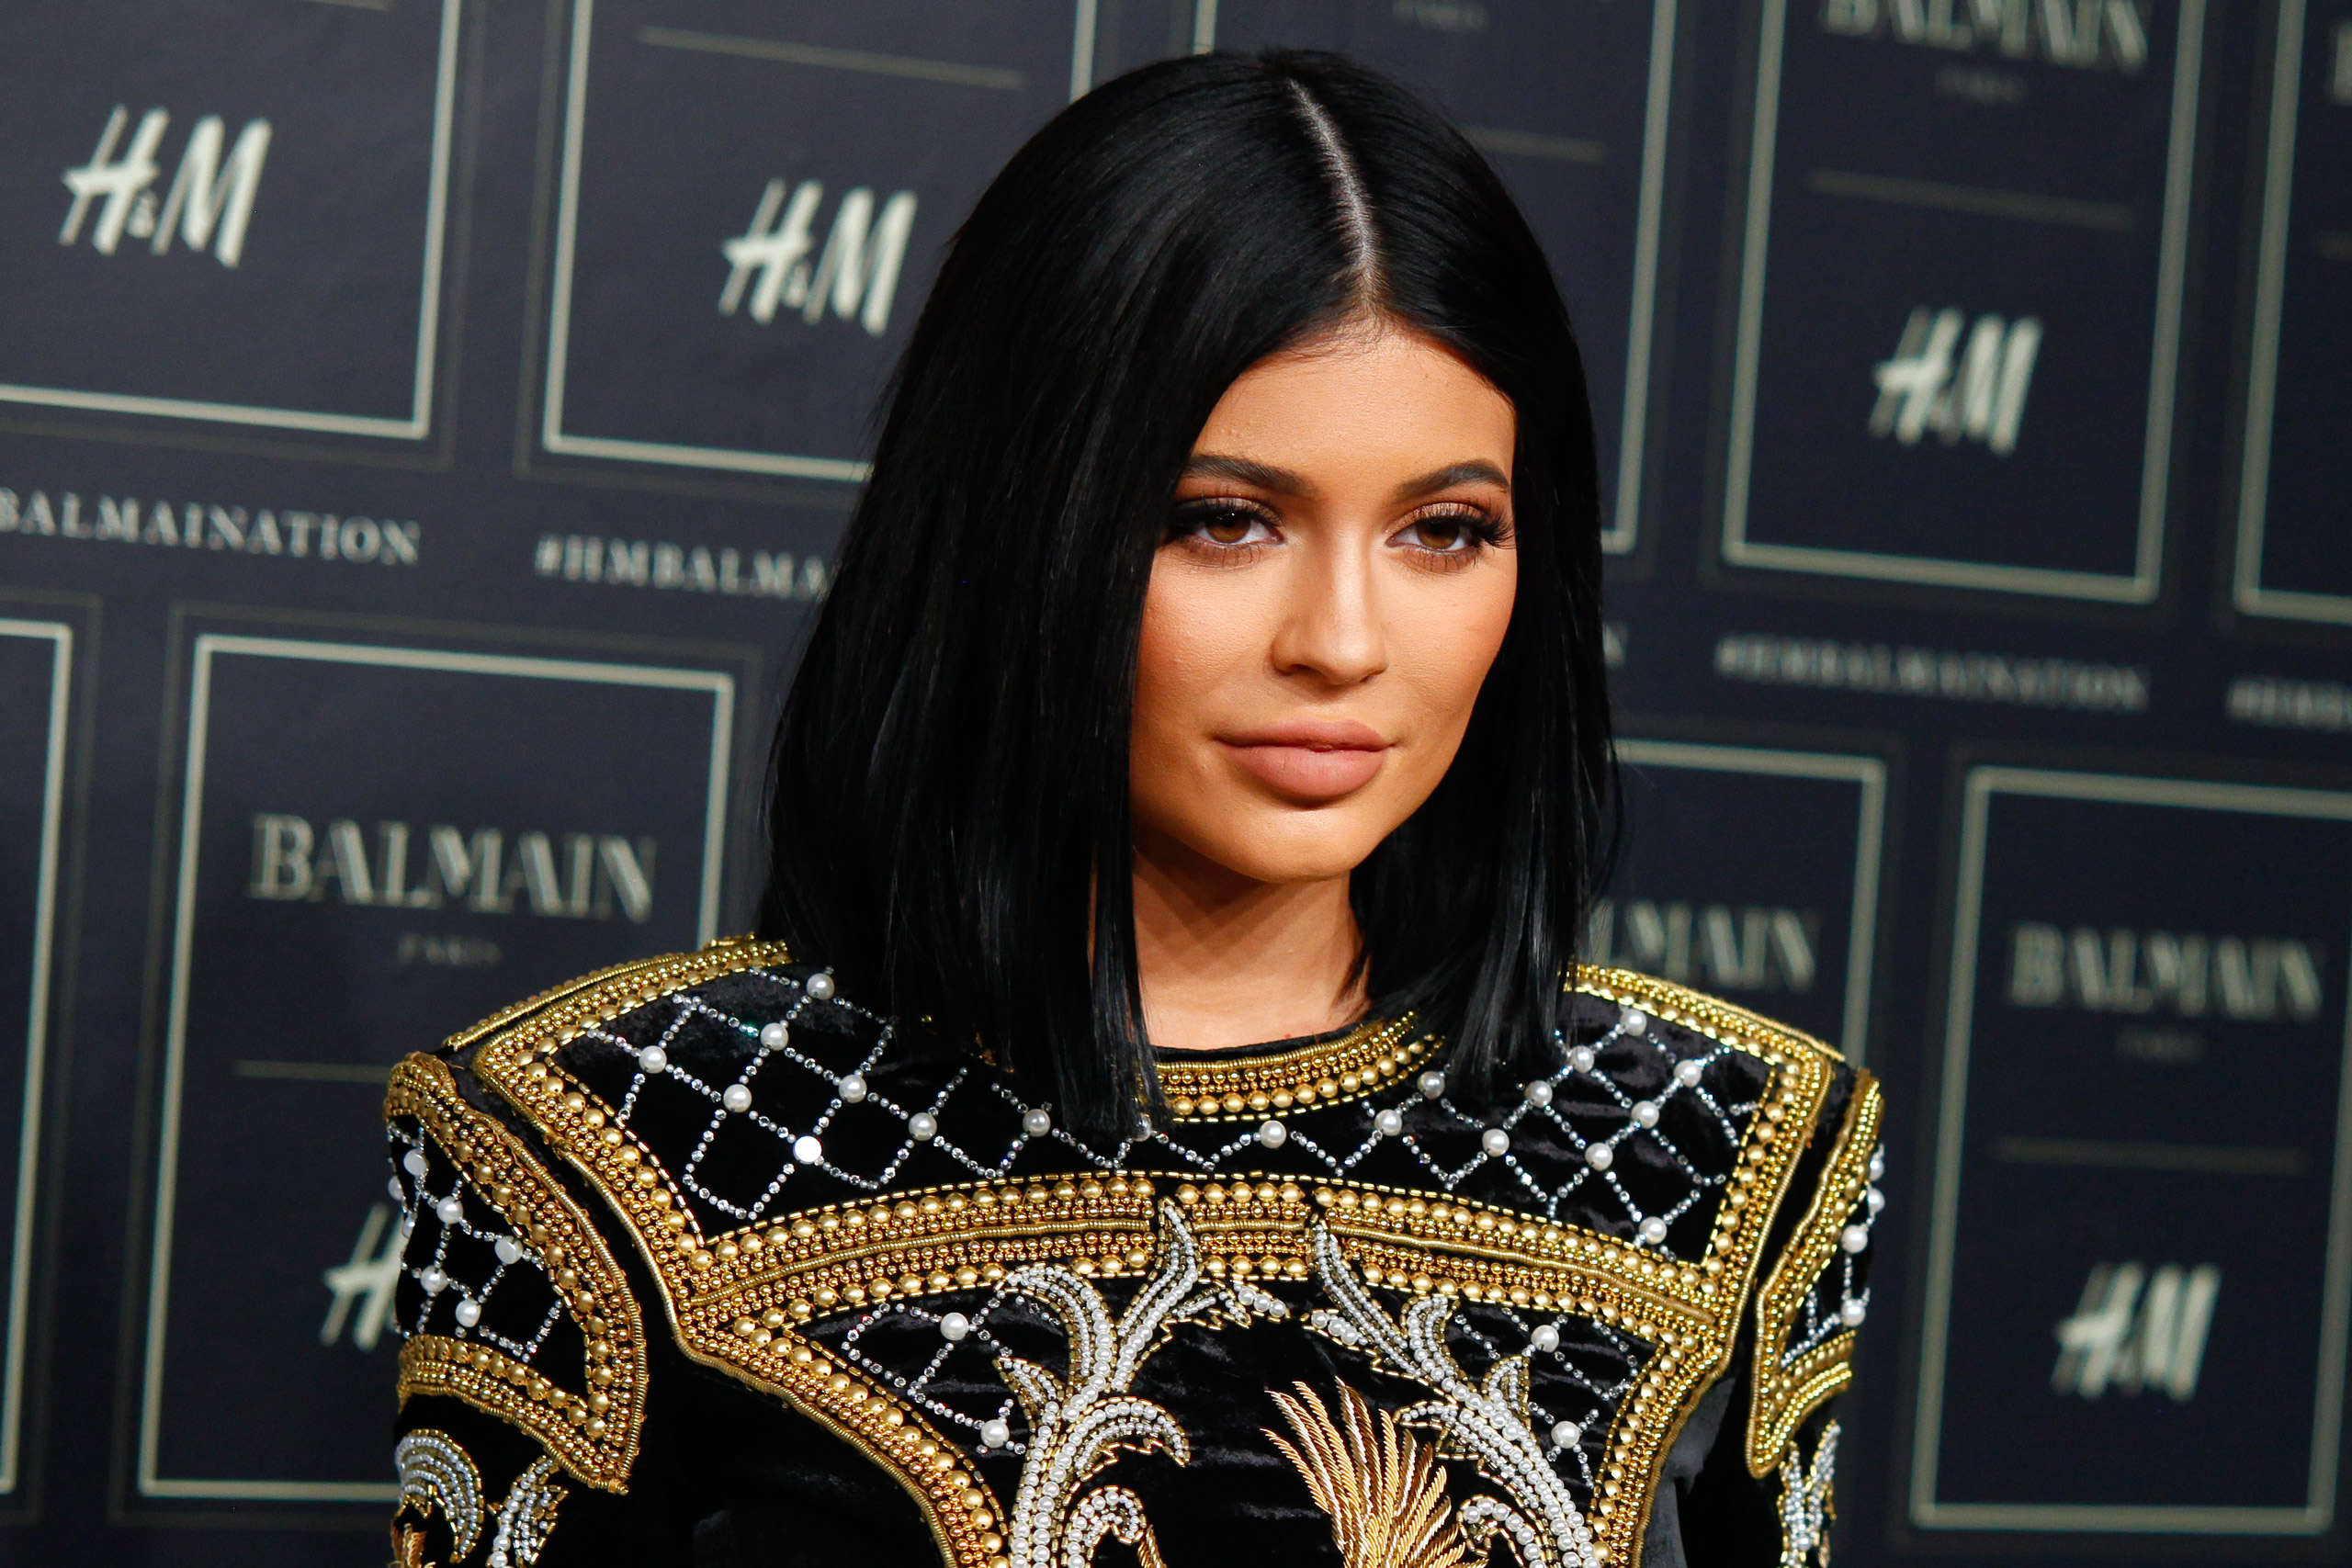 Kylie Jenner attends the BALMAIN x H&amp;M Collection launch event at 23 Wall Street on Tuesday, Oct. 20, 2015, in New York. (Photo by Andy Kropa/Invision/AP)